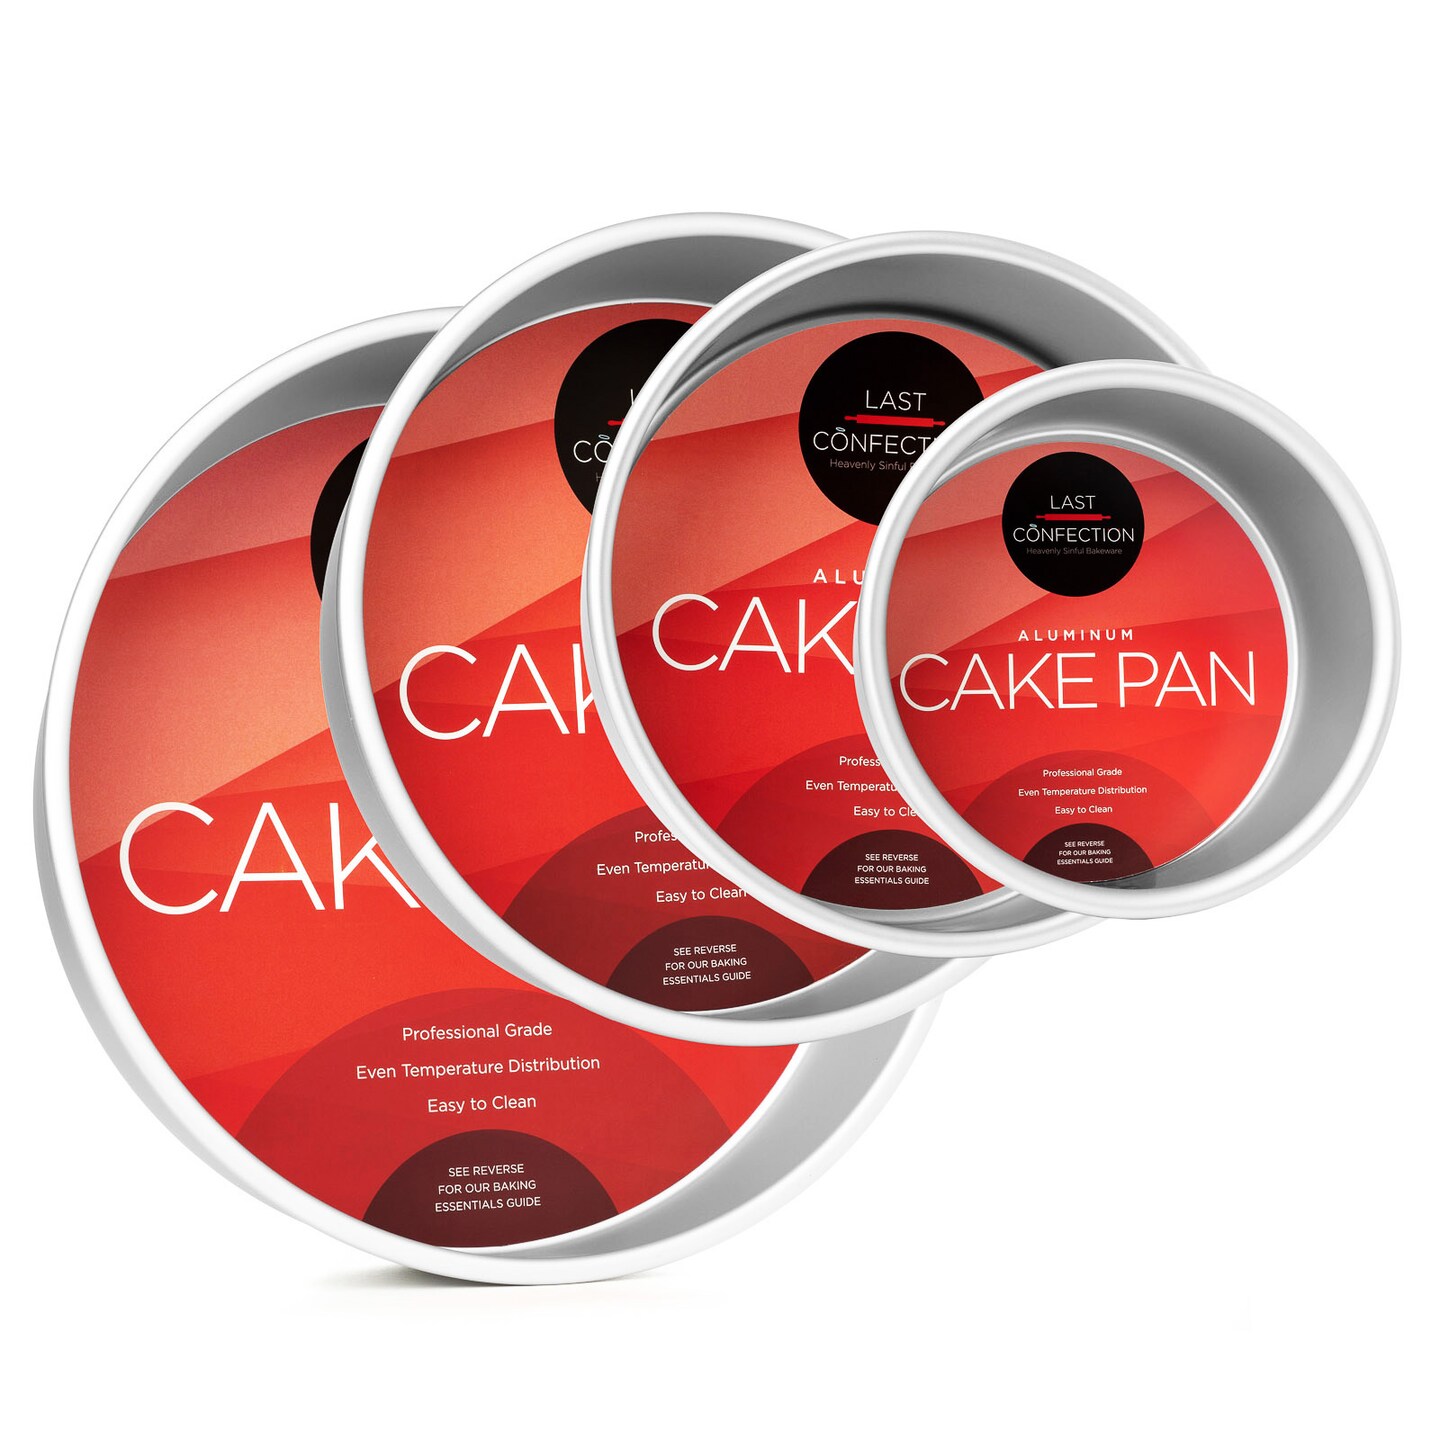 Kitchen & Table by H-E-B Copper Non-Stick Round Cake Pan - Shop Pans &  Dishes at H-E-B